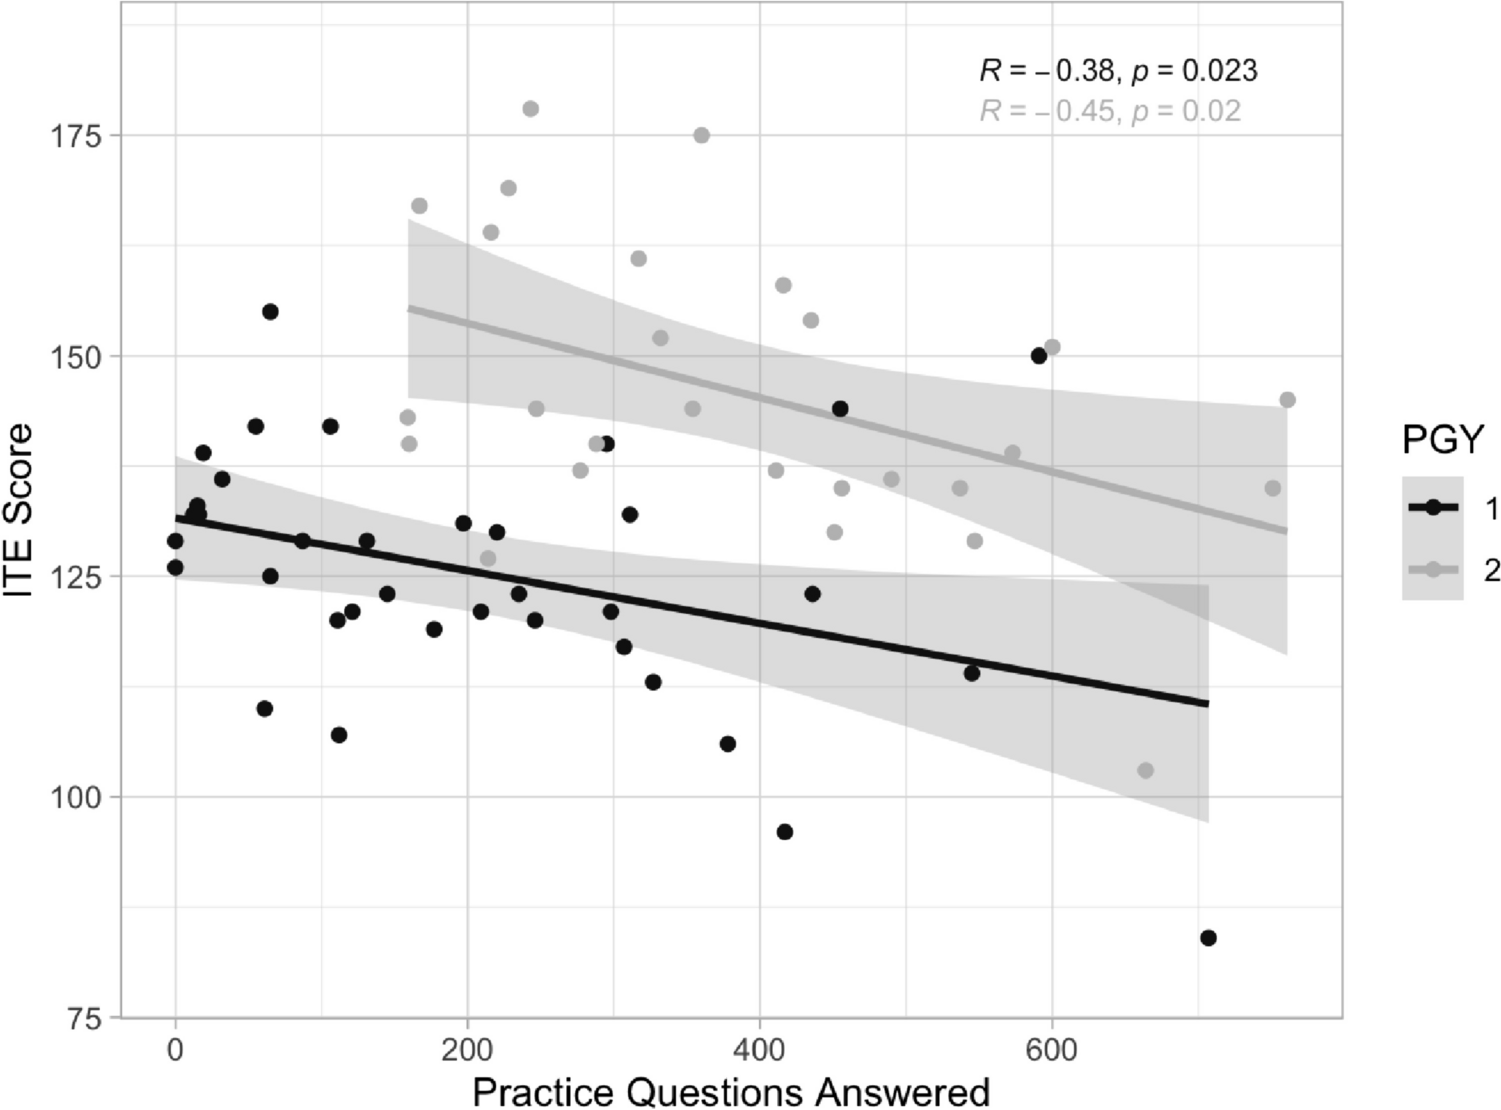 Testing the Effects of Individual Residents’ Retrieval Practice on Standardized Examination Scores